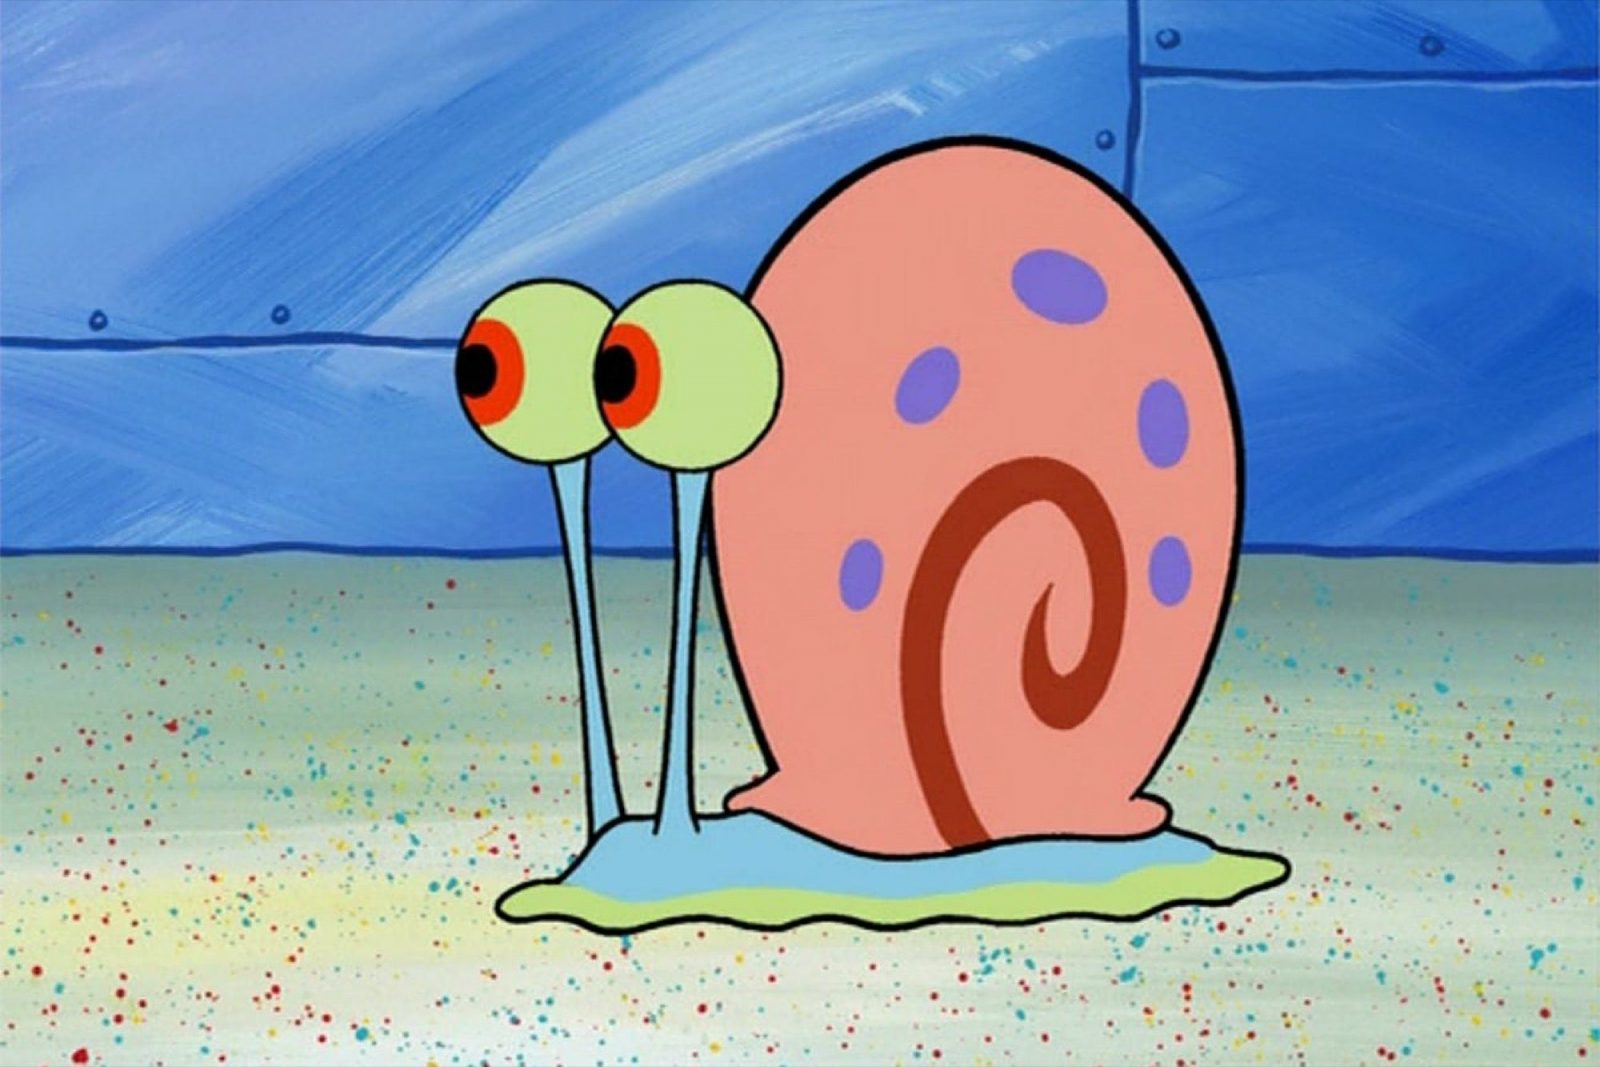 You got: Gary the Snail! Which SpongeBob SquarePants Character Are You?